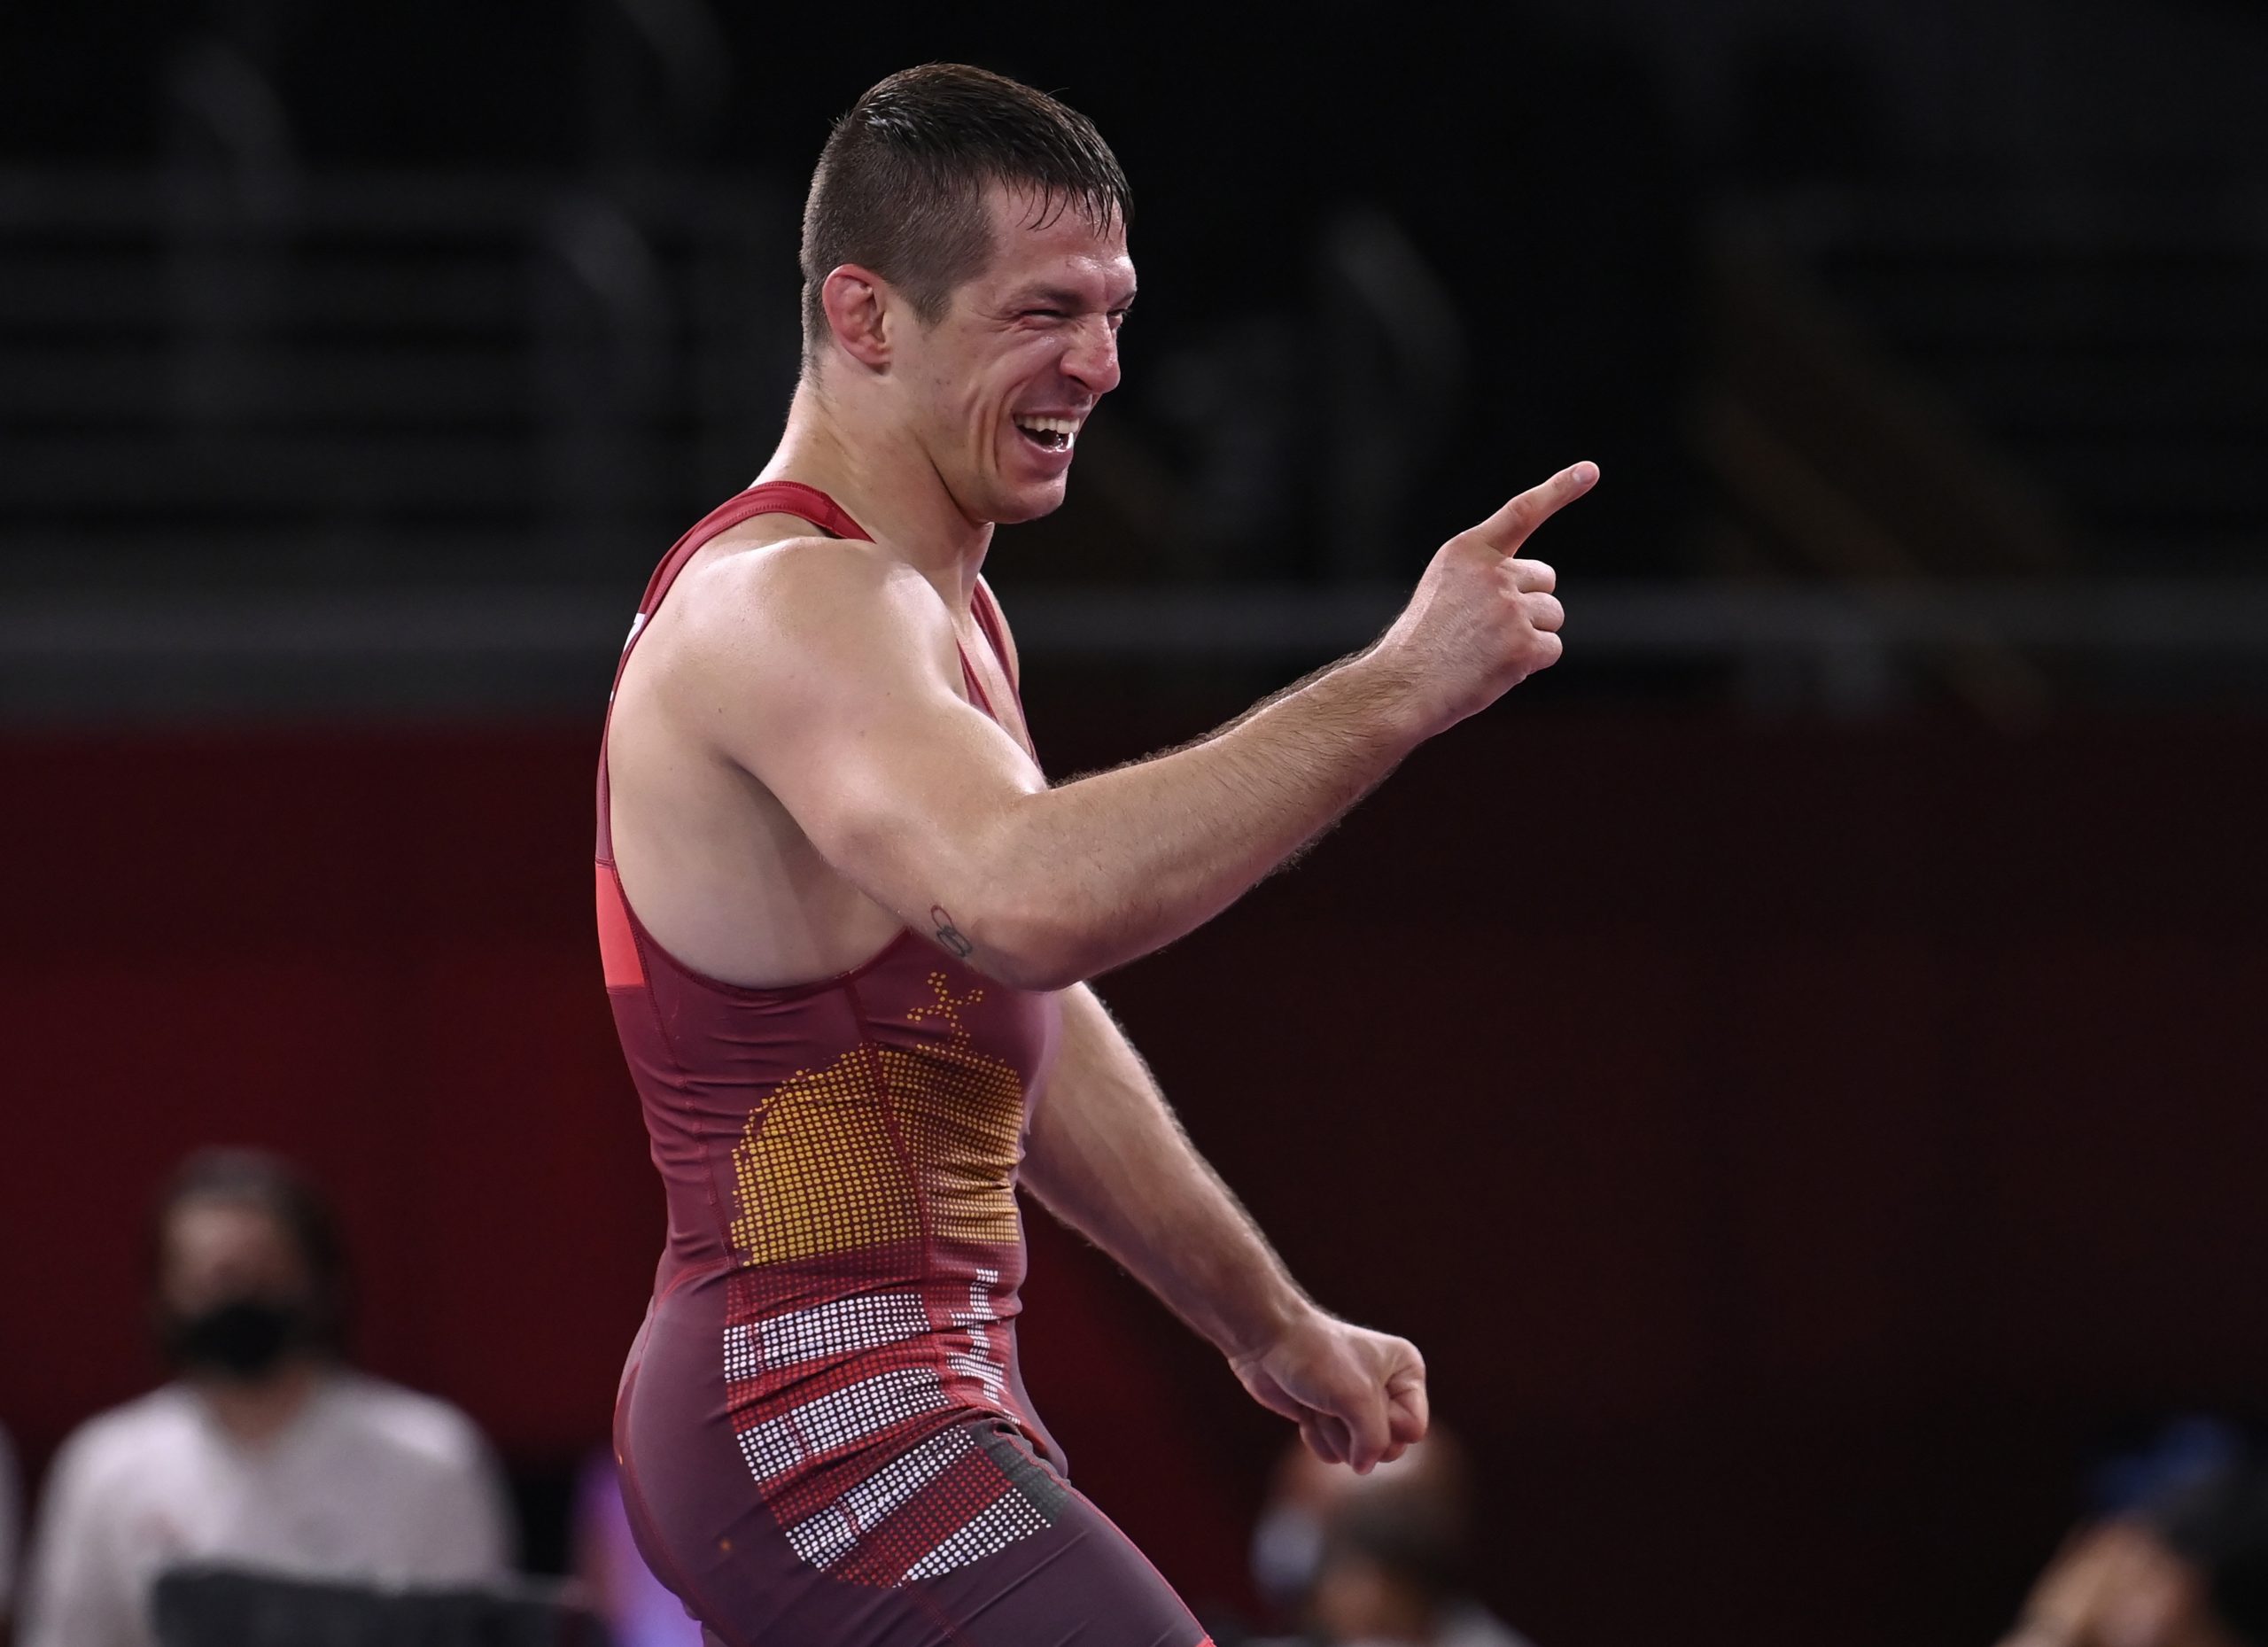 Wrestling Champion Tamás Lőrincz Is One Step Away From Olympic Gold